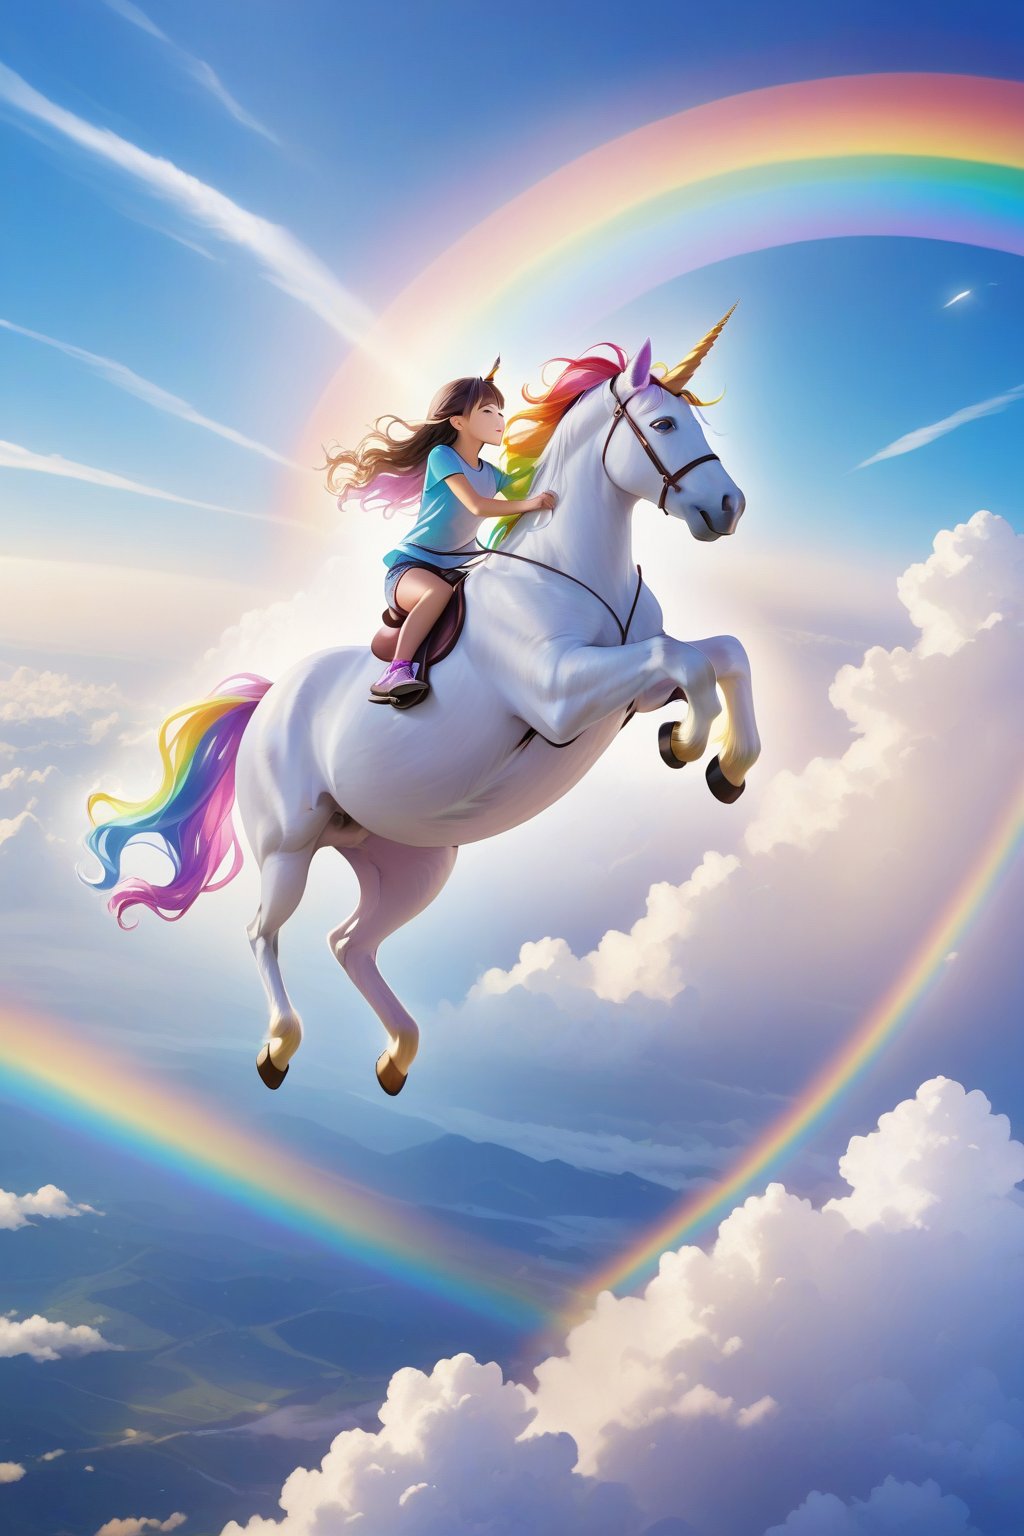 An interesting and visually descriptive prompt of a girl riding a rainbow unicorn, with the unicorn's horn glowing with a rainbow of colors as they soar through the clouds.